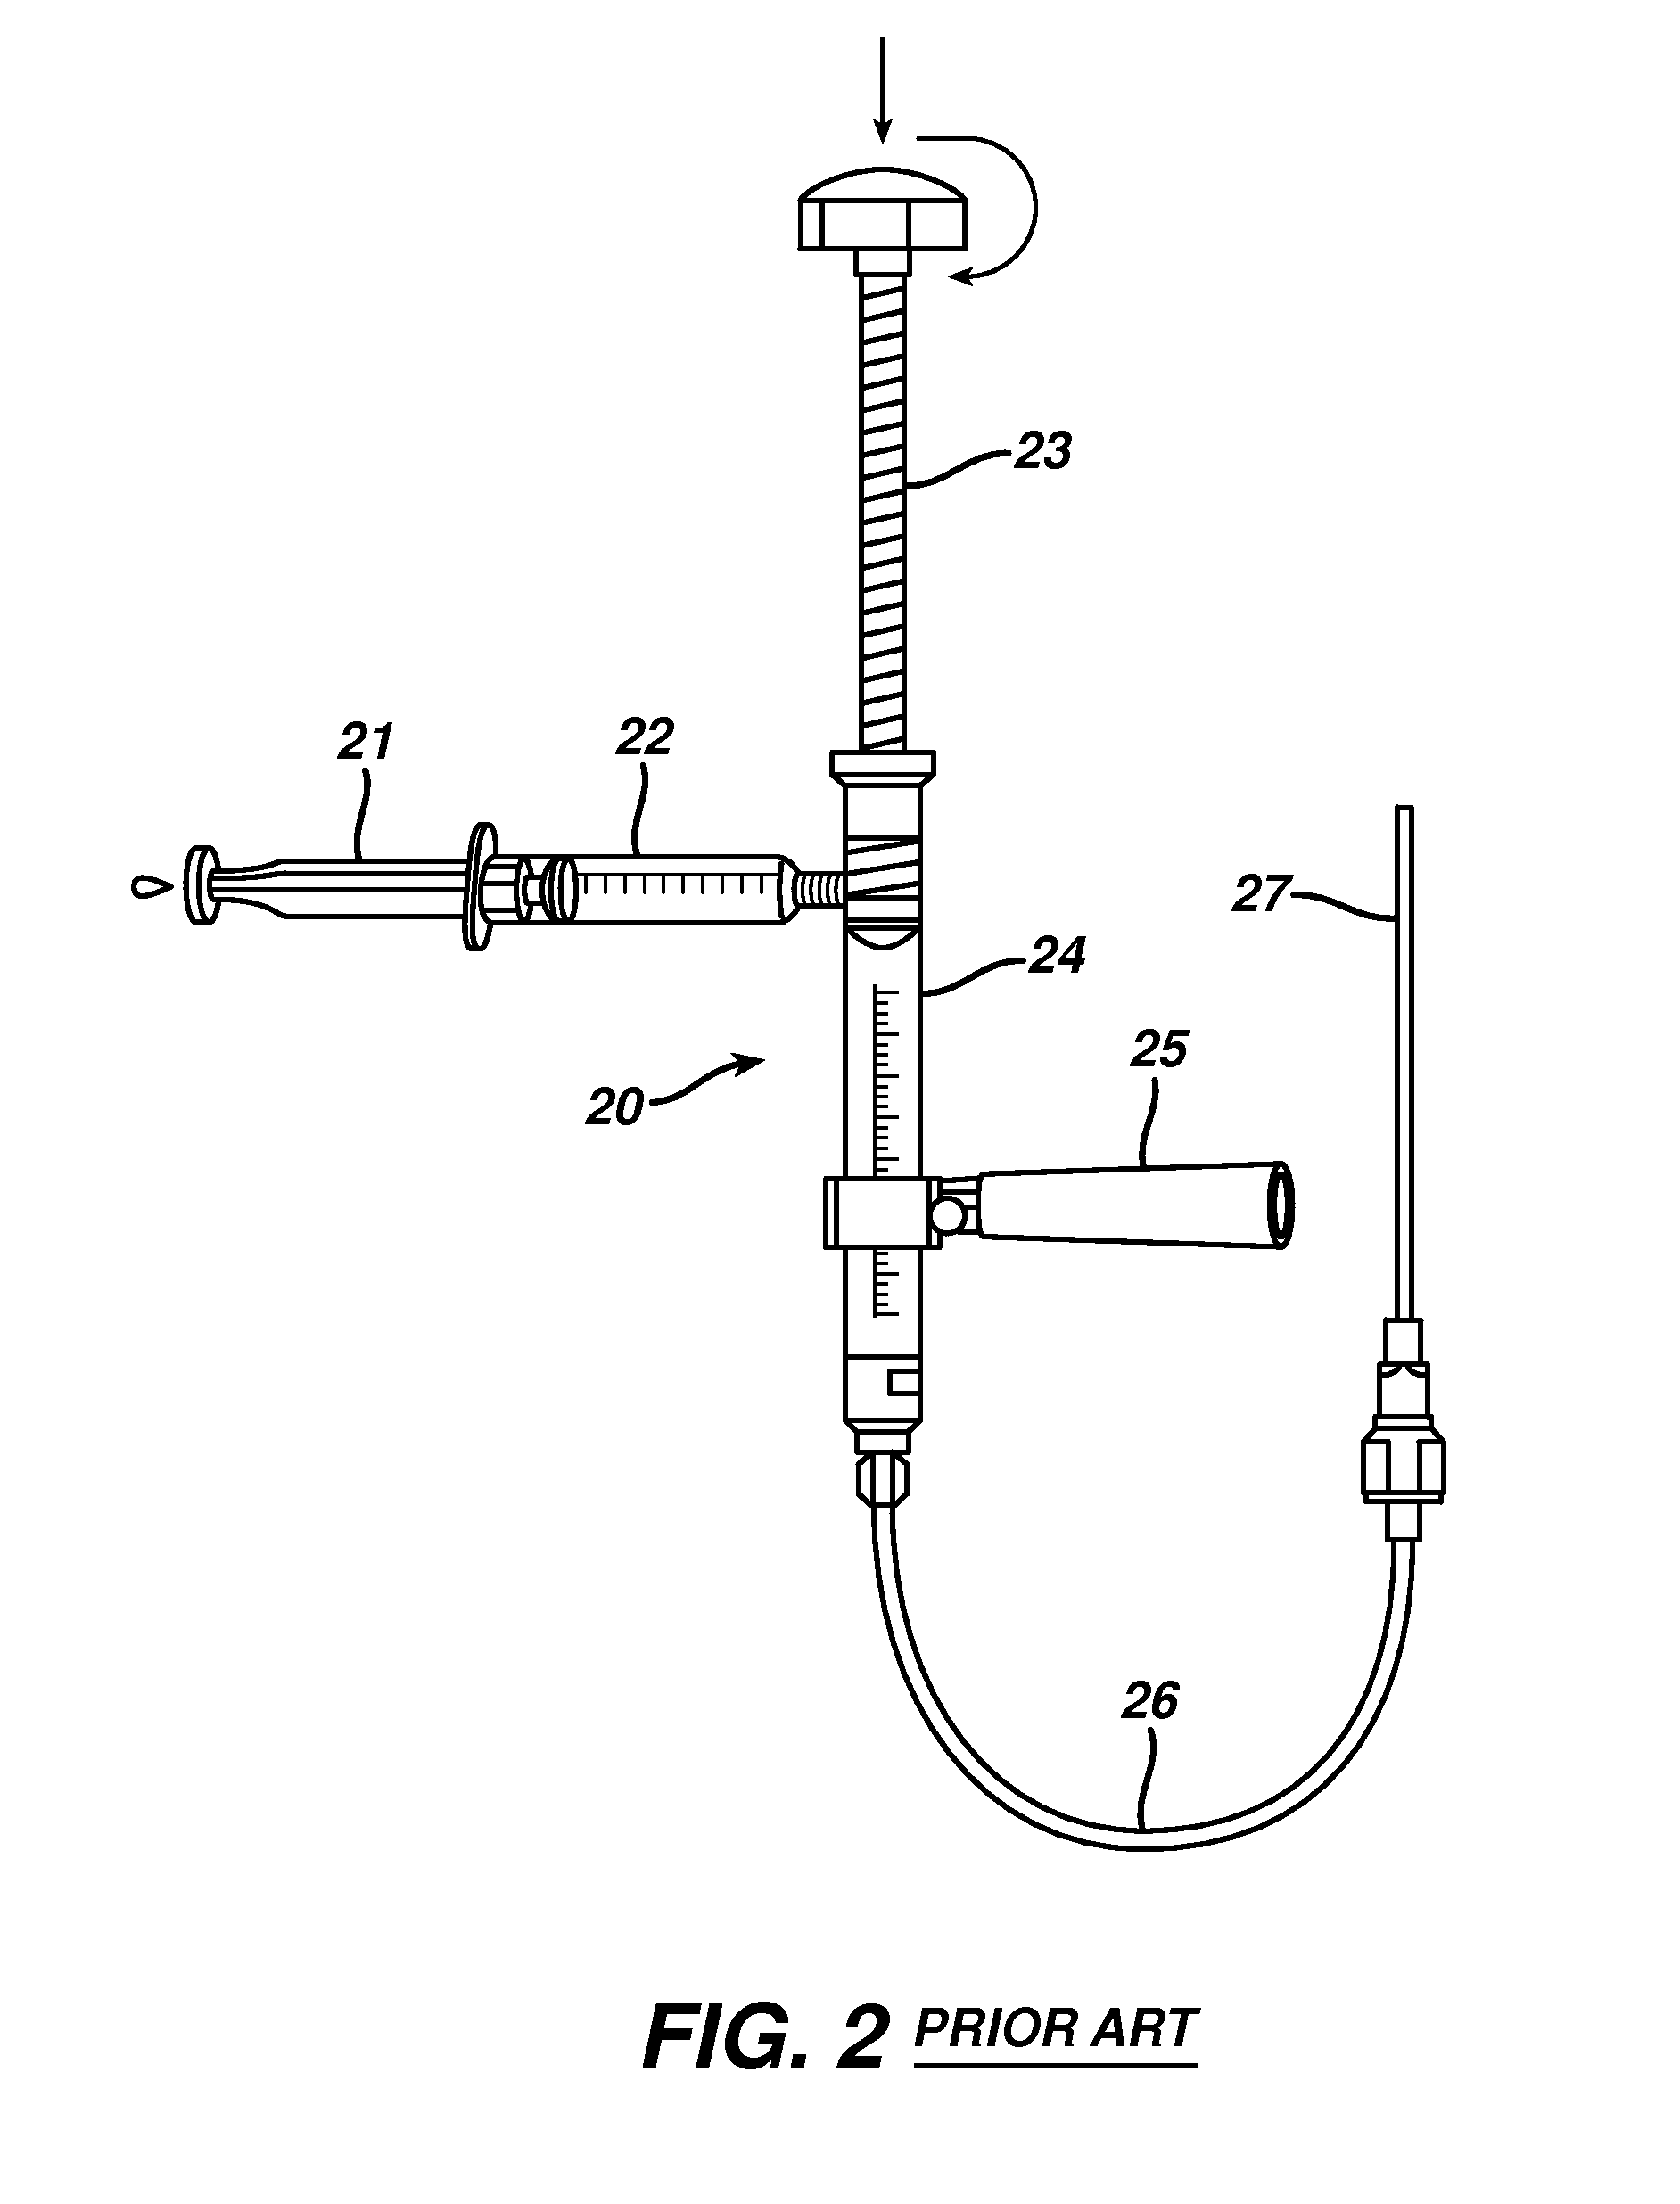 Hydraulic Device for the Injection of Bone Cement in Percutaneous Vertebroplasty